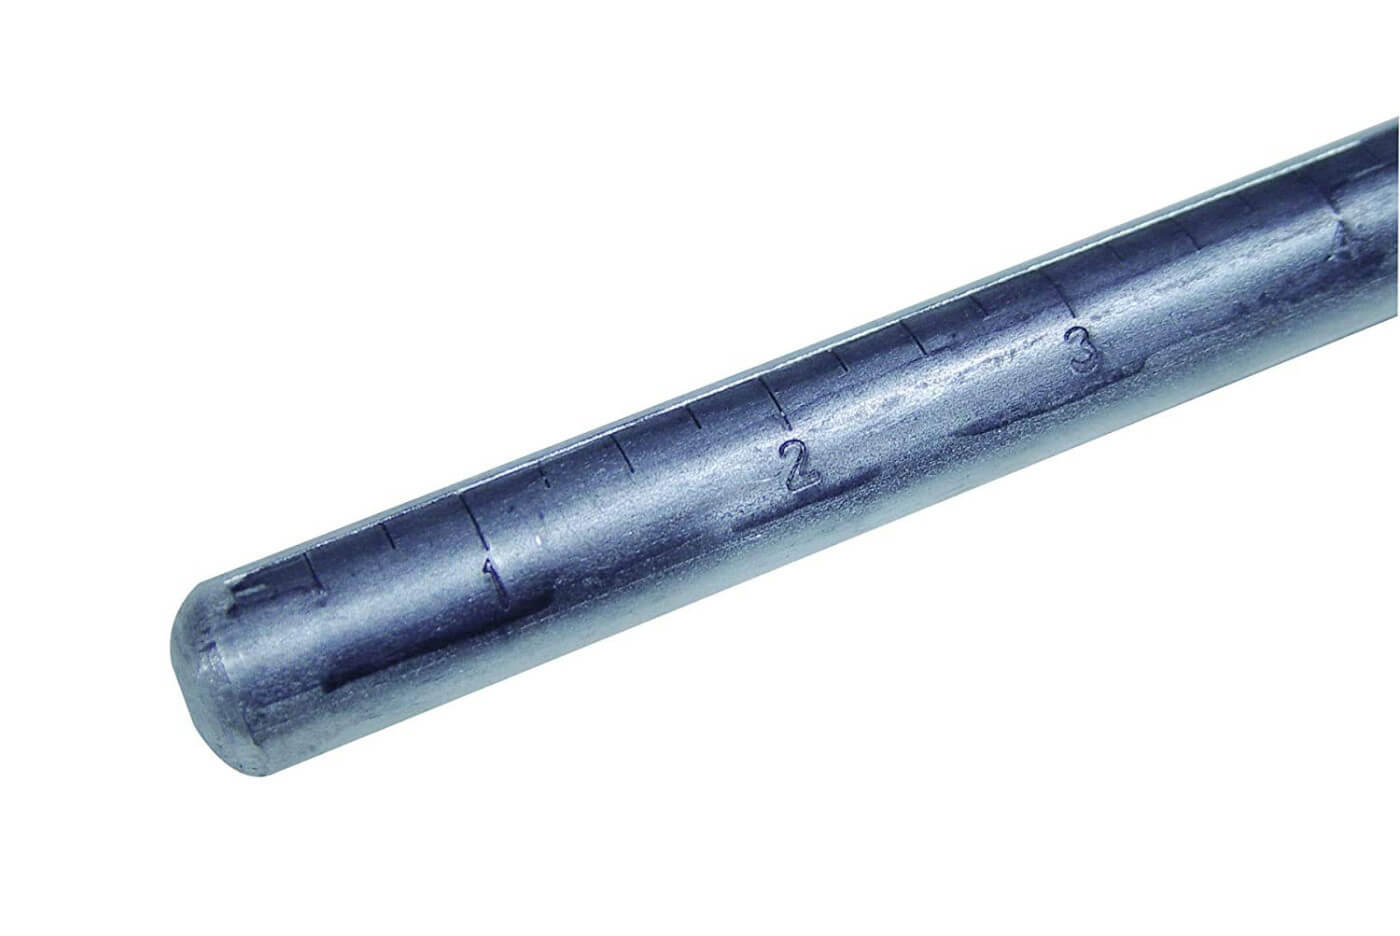 Hemispherical tip of a high-quality tamping rod